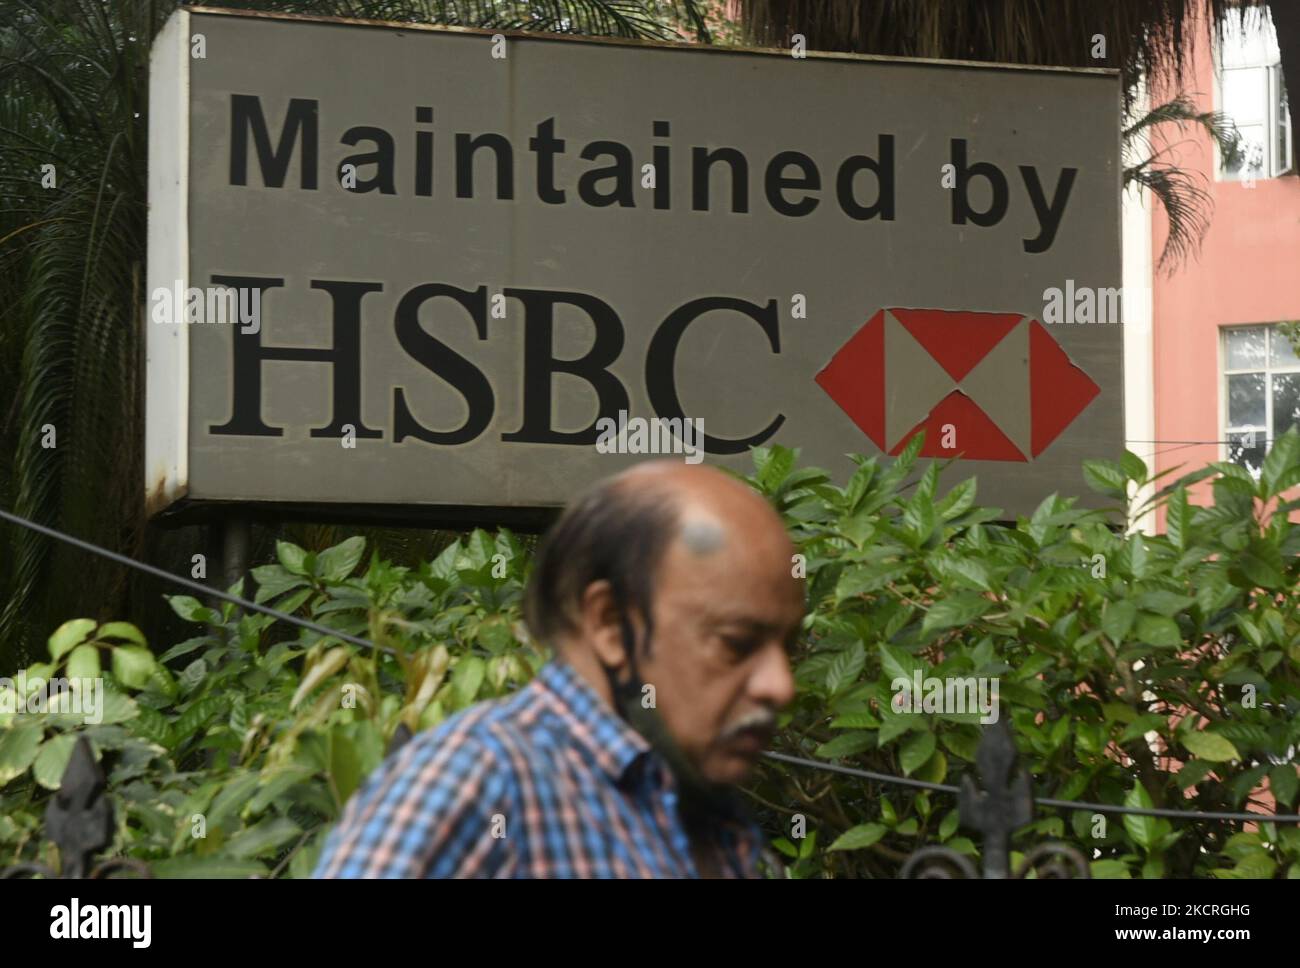 A man crosses HSBC logo in Kolkata, India, 25 October, 2021. HSBC’s profits rose 74% in the third quarter as improving economic conditions allowed the bank to release hundreds of millions of pounds originally set aside for a potential jump in loan defaults during the pandemic according to an Indian media report. (Photo by Indranil Aditya/NurPhoto) Stock Photo